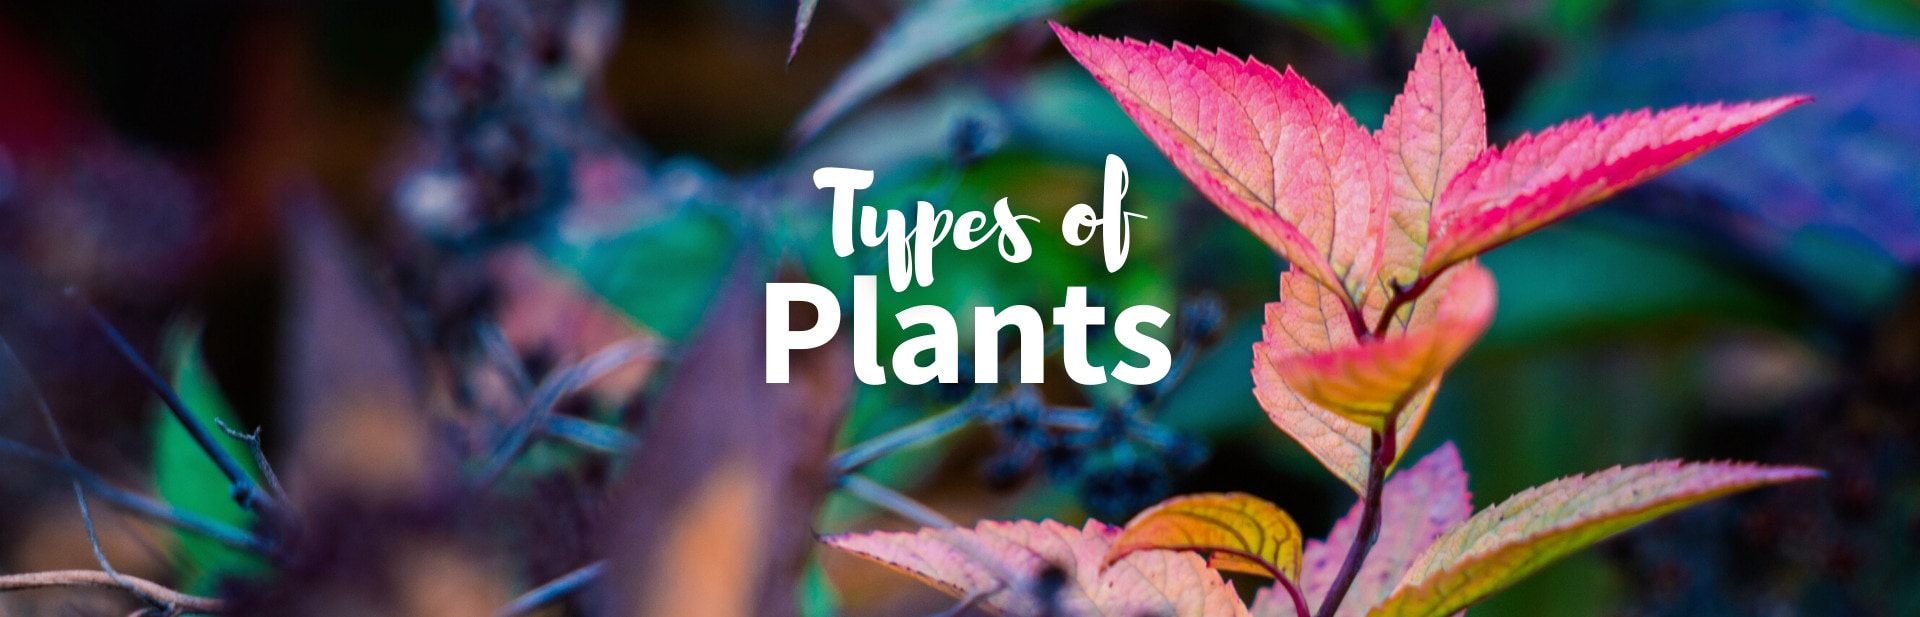 21 Types of Plants: From the Dinosaur Age to the Present